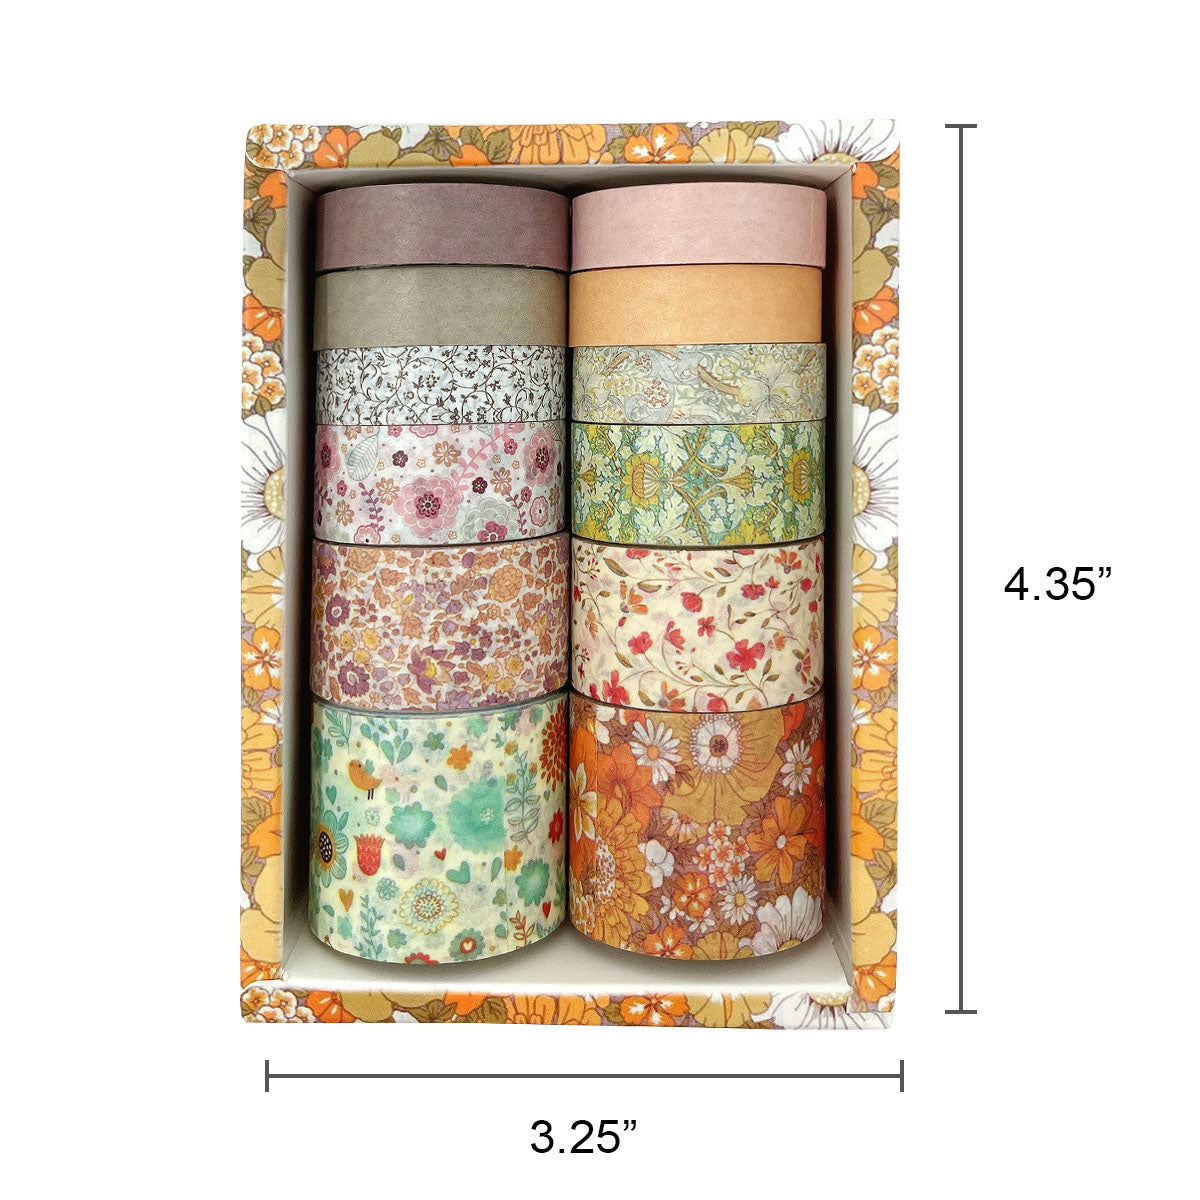 Wrapables Decorative Washi Tape Box Set for DIY Arts & Crafts, Scrapbooking, Diary, Stationery, Card-Making, Gift Wrapping (12 Rolls)